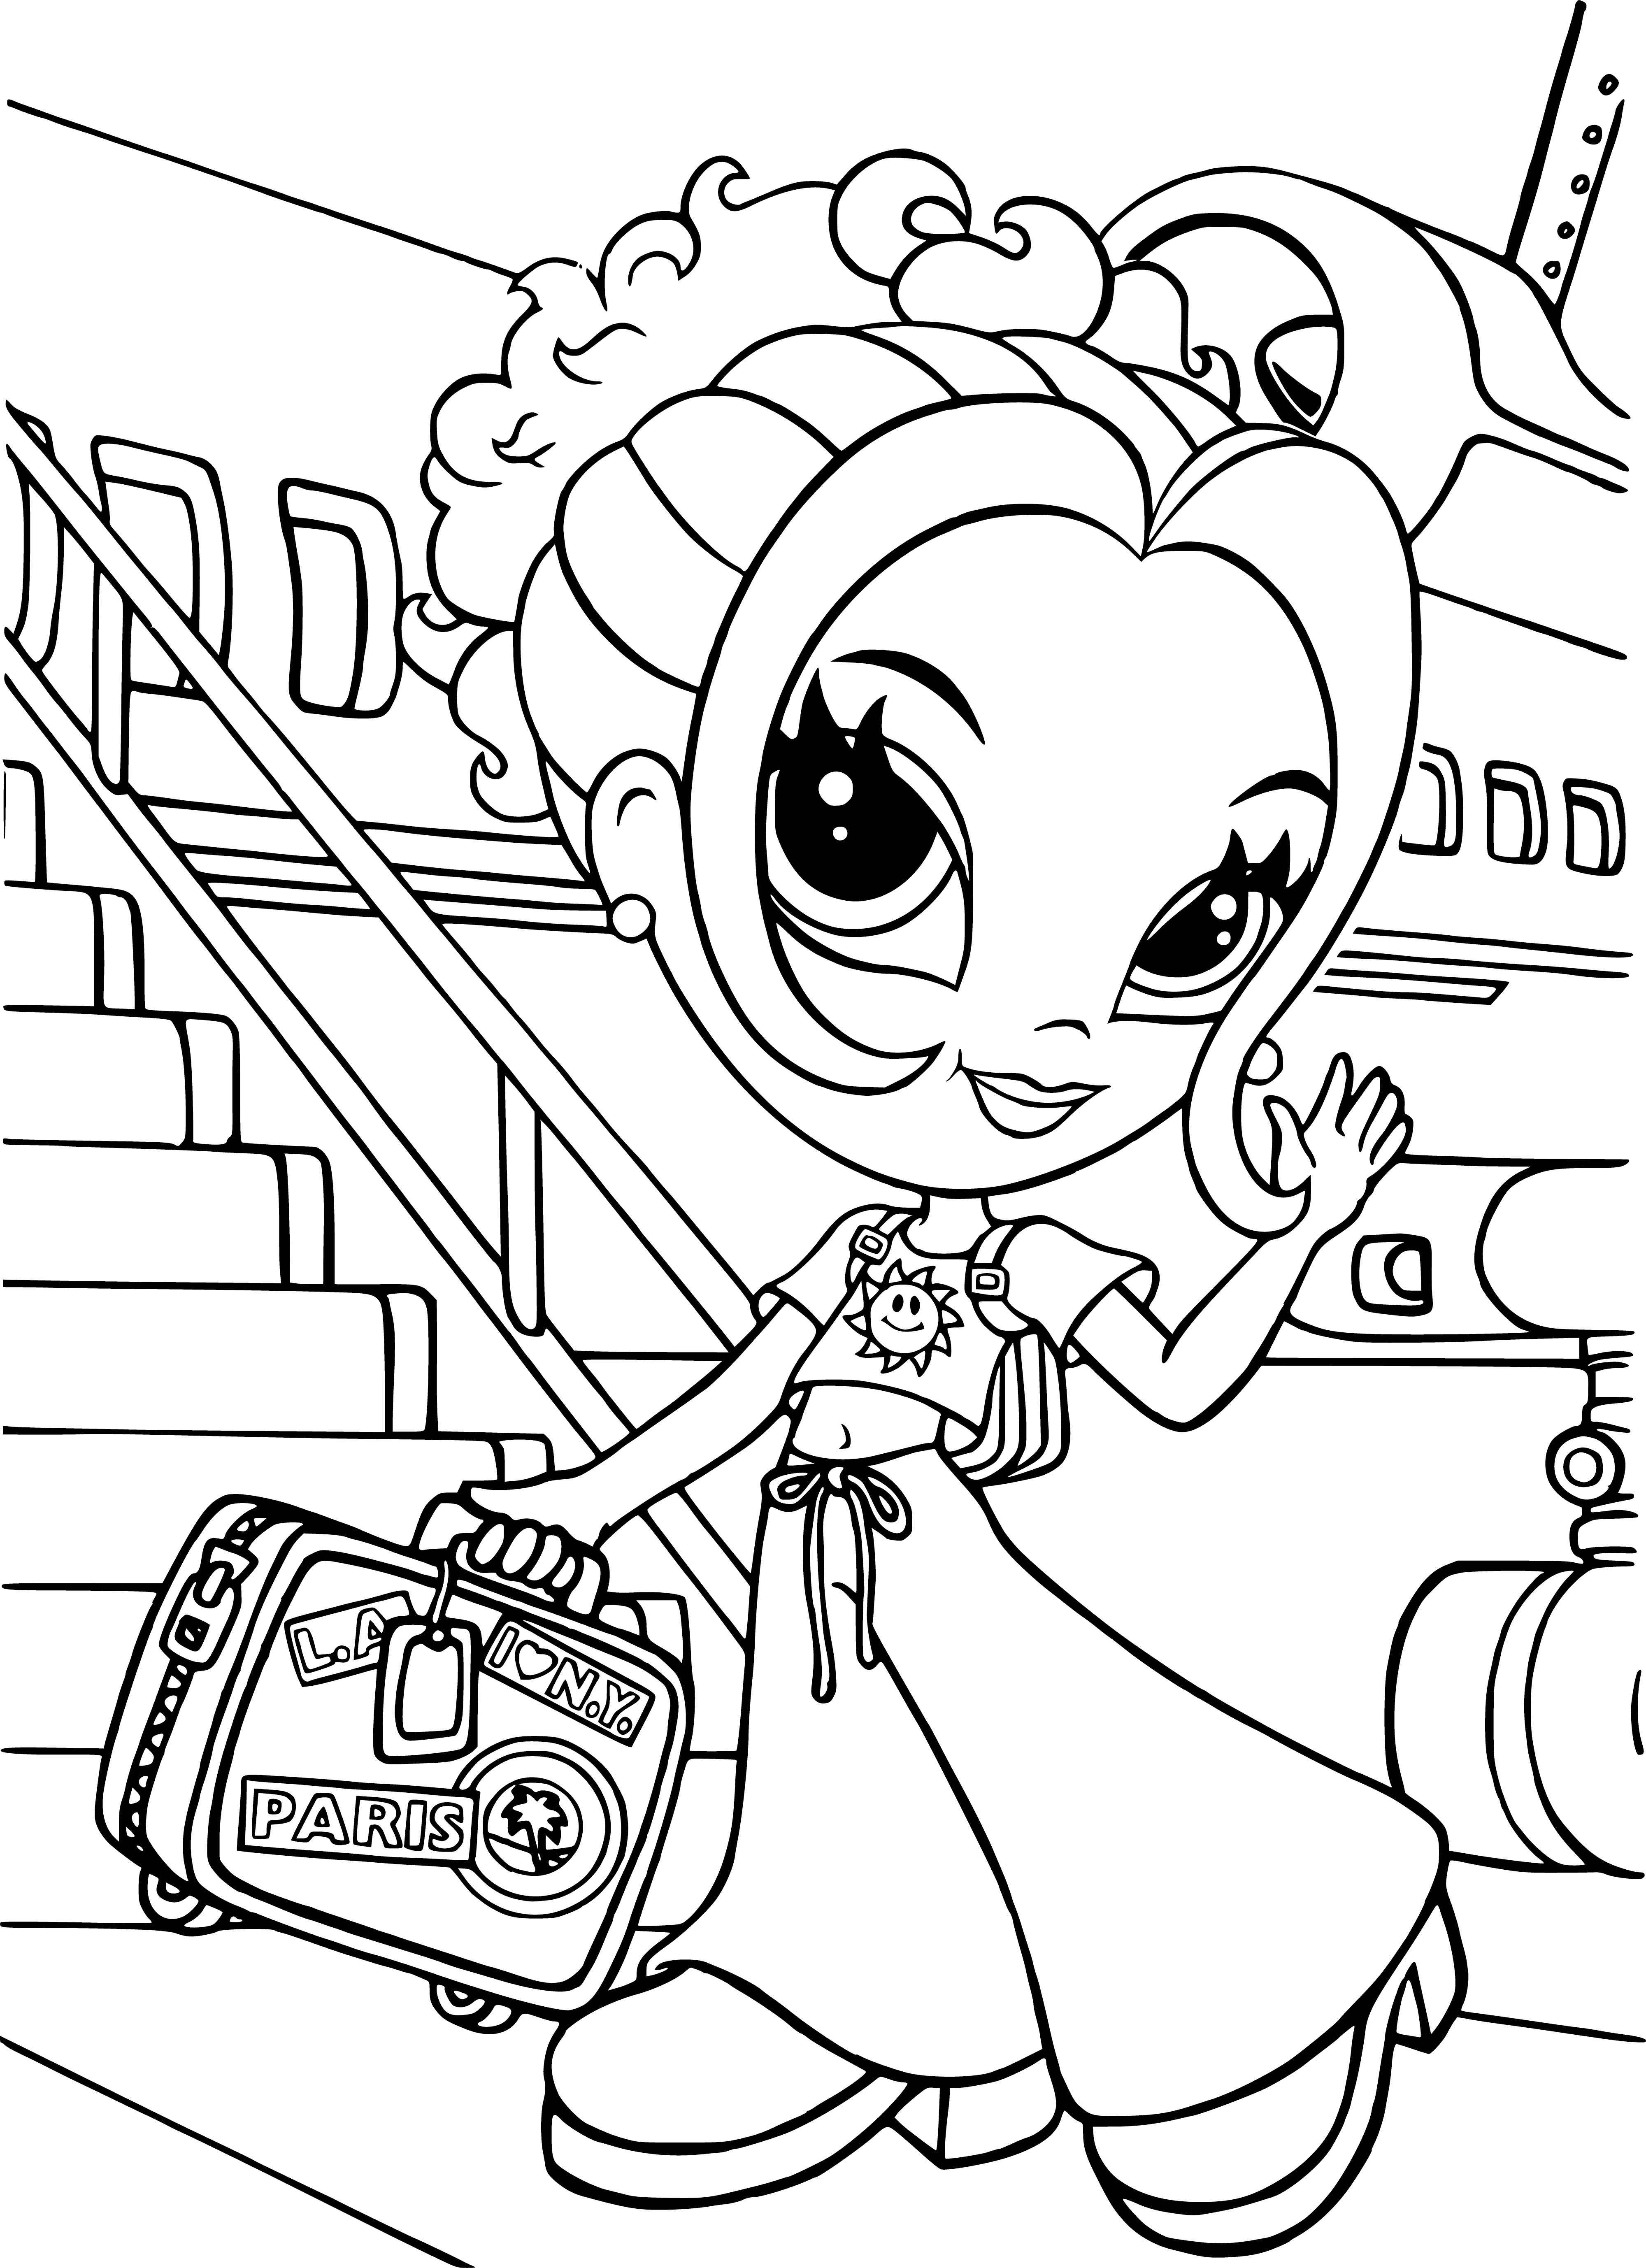 coloring page: Girl coloring paged in pink & purple dress, blonde hair & blue eyes, holding pink handbag, wearing gold jewelry, & standing in starry pink background.